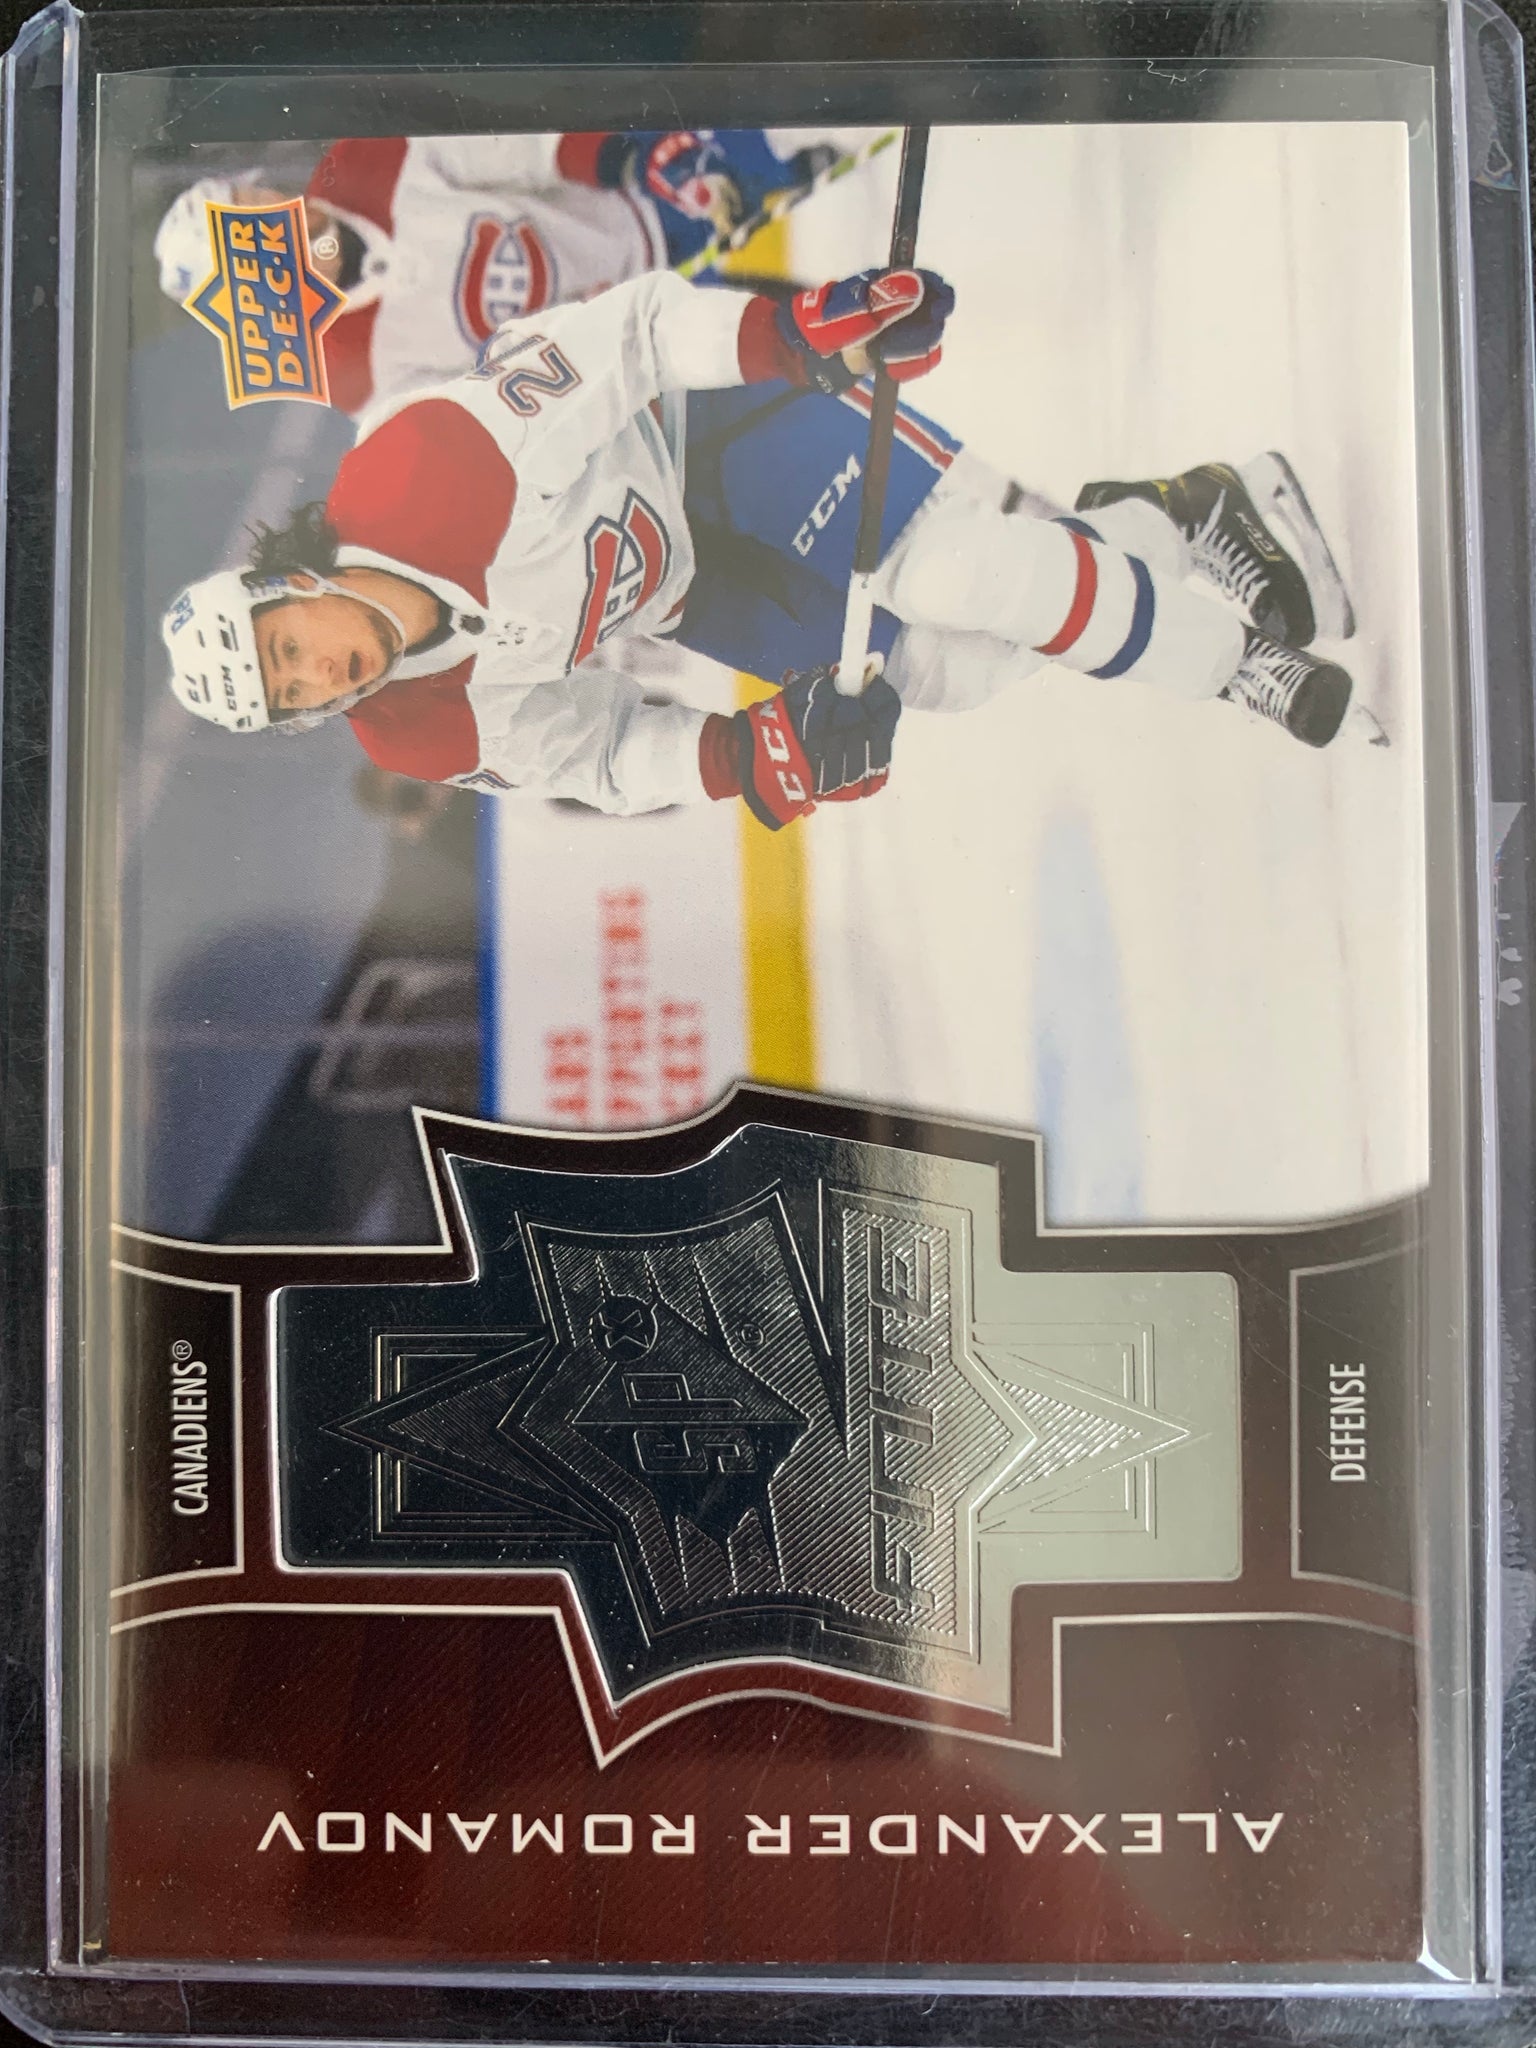 2020-21 UPPER DECK EXTENDED HOCKEY #SF-42 MONTREAL CANADIENS - ALEXANDER ROMANOV SPX FINITE ROOKIE CARD NUMBERED 1578/2999